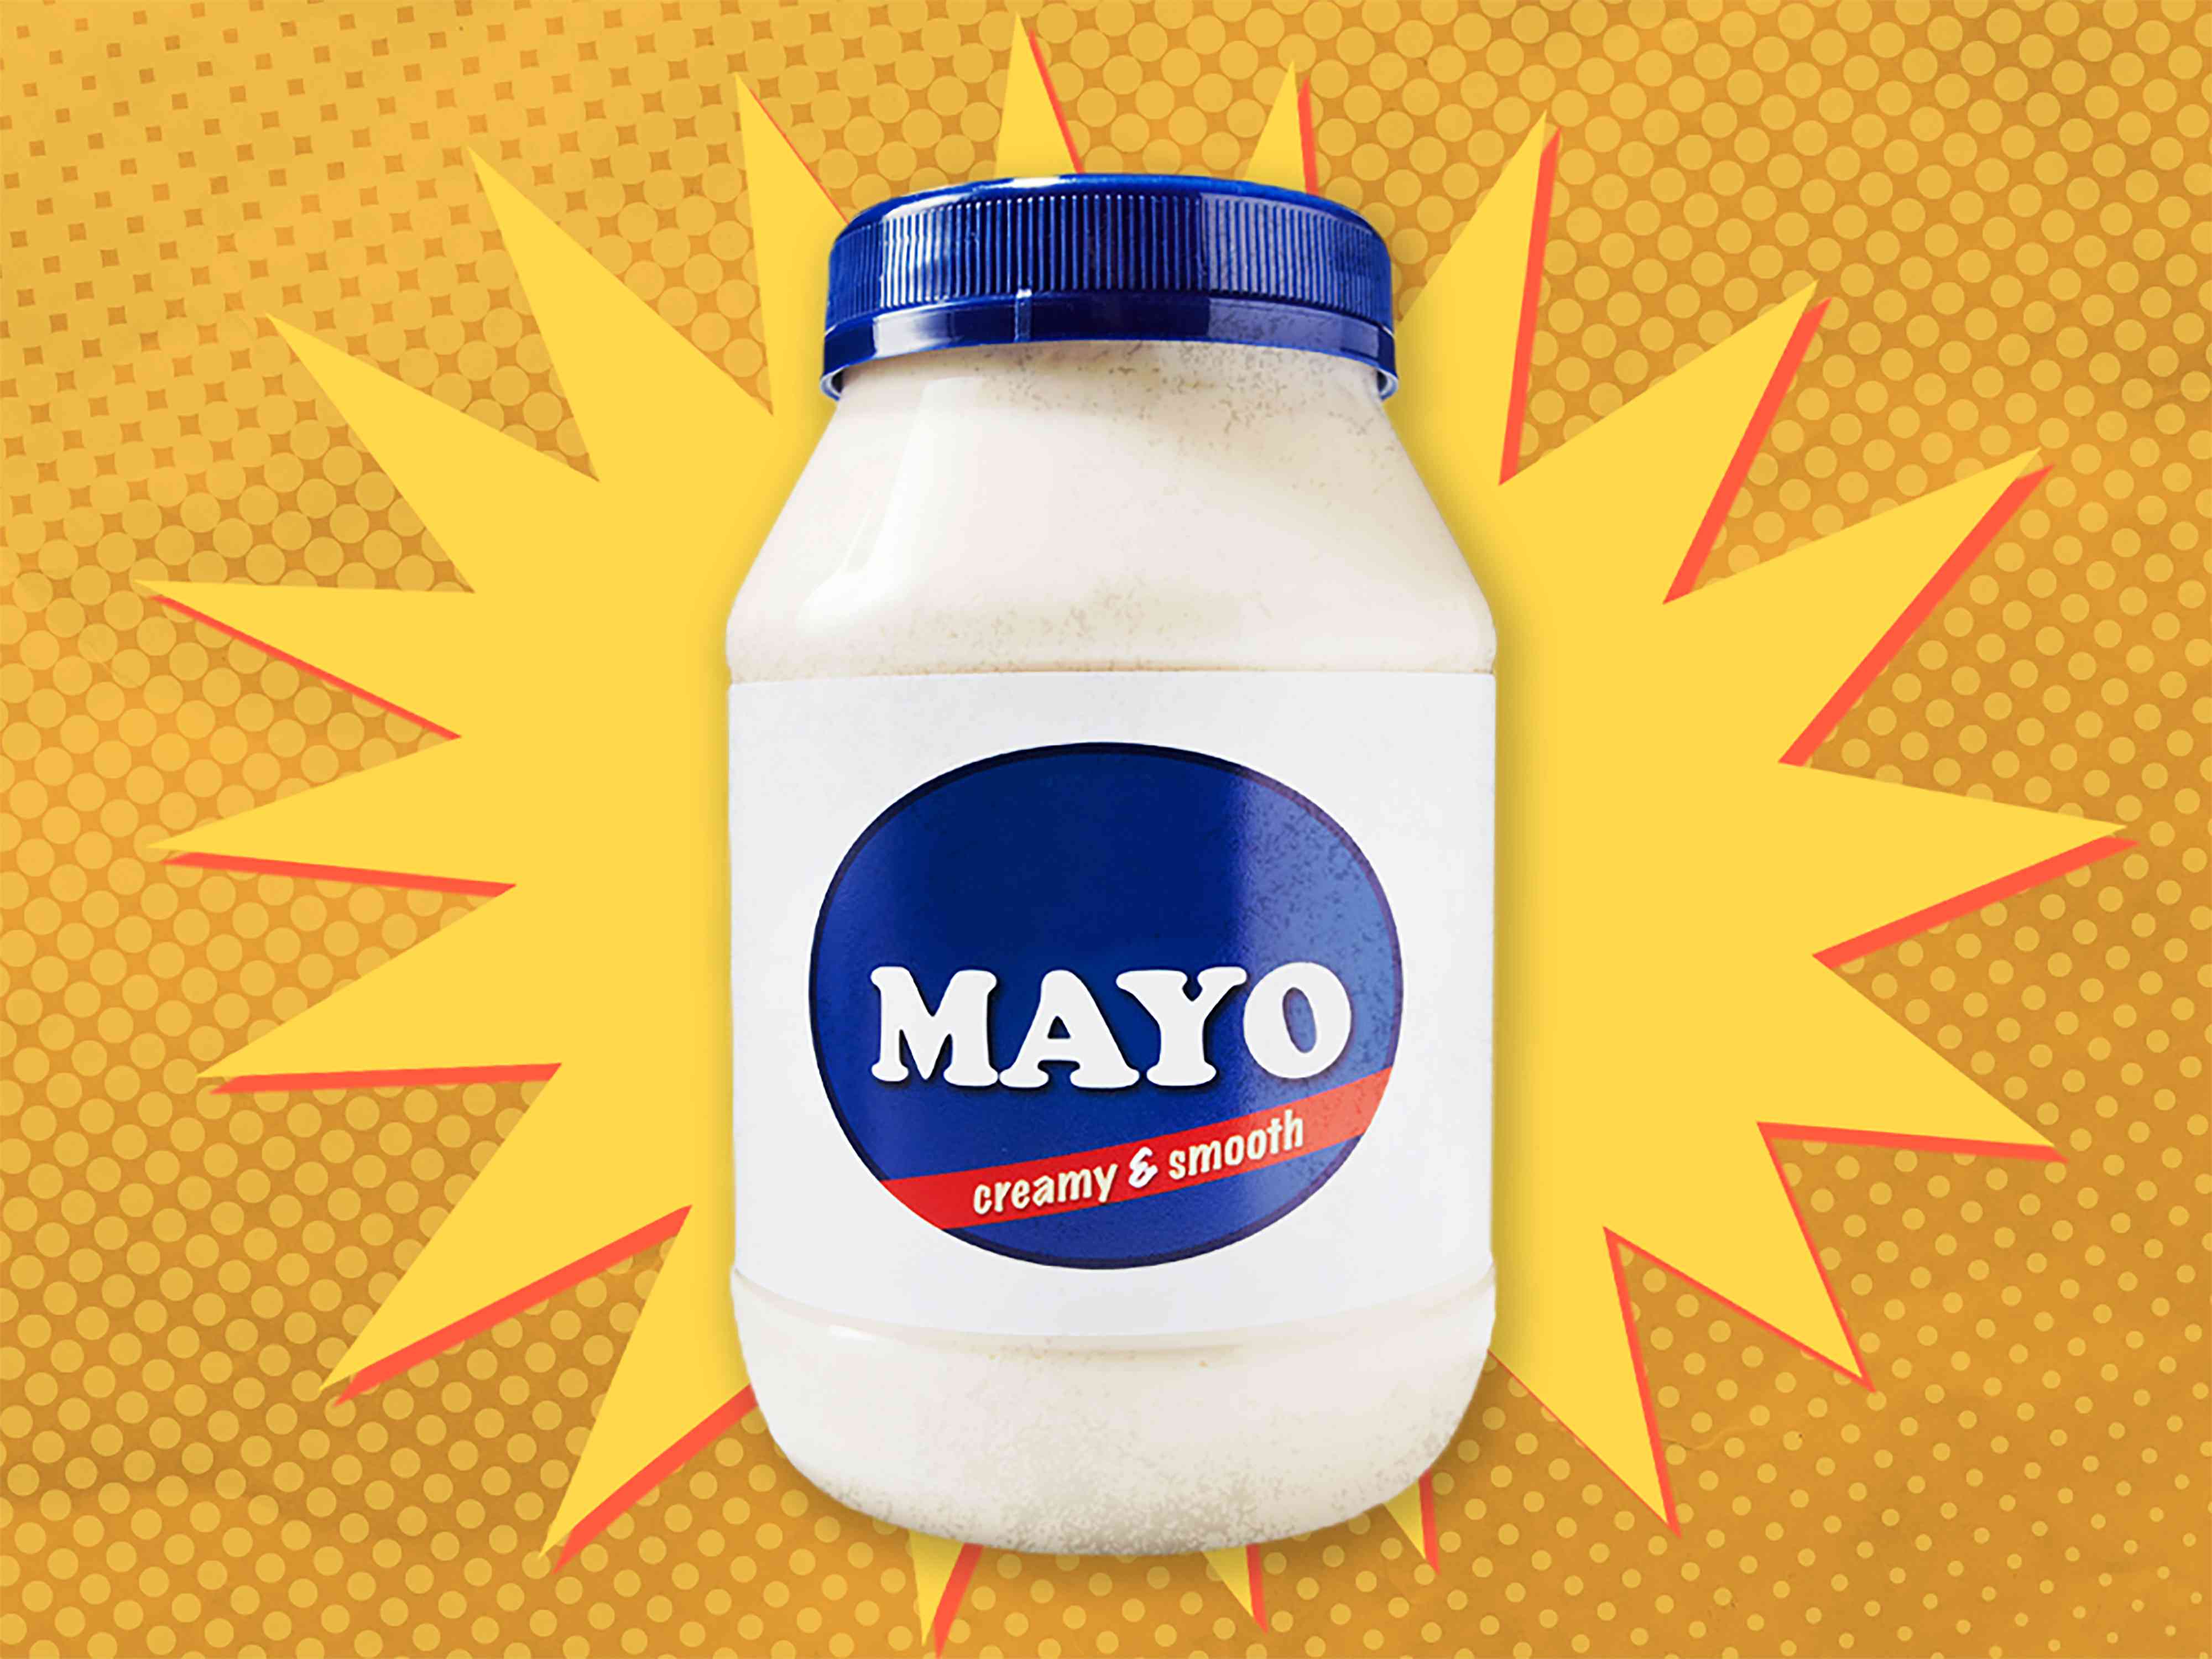 I Asked 5 Chefs to Name Their Favorite Mayo, and They All Chose the Same Brand